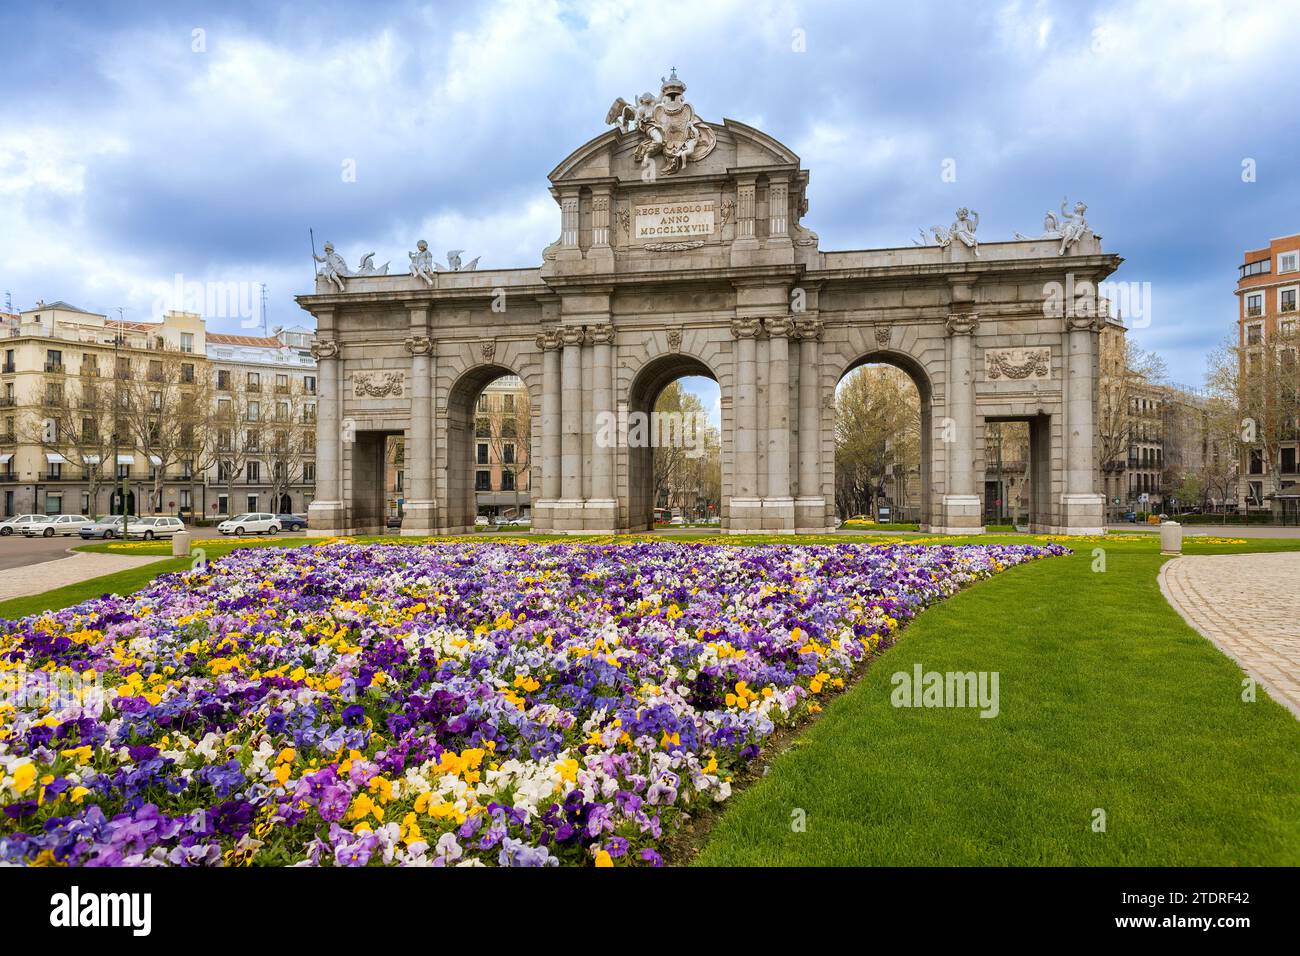 View of The Puerta de Alcalá, a Neo-classical gate in the Plaza de la Independencia, Madrid, Spain. Stock Photo